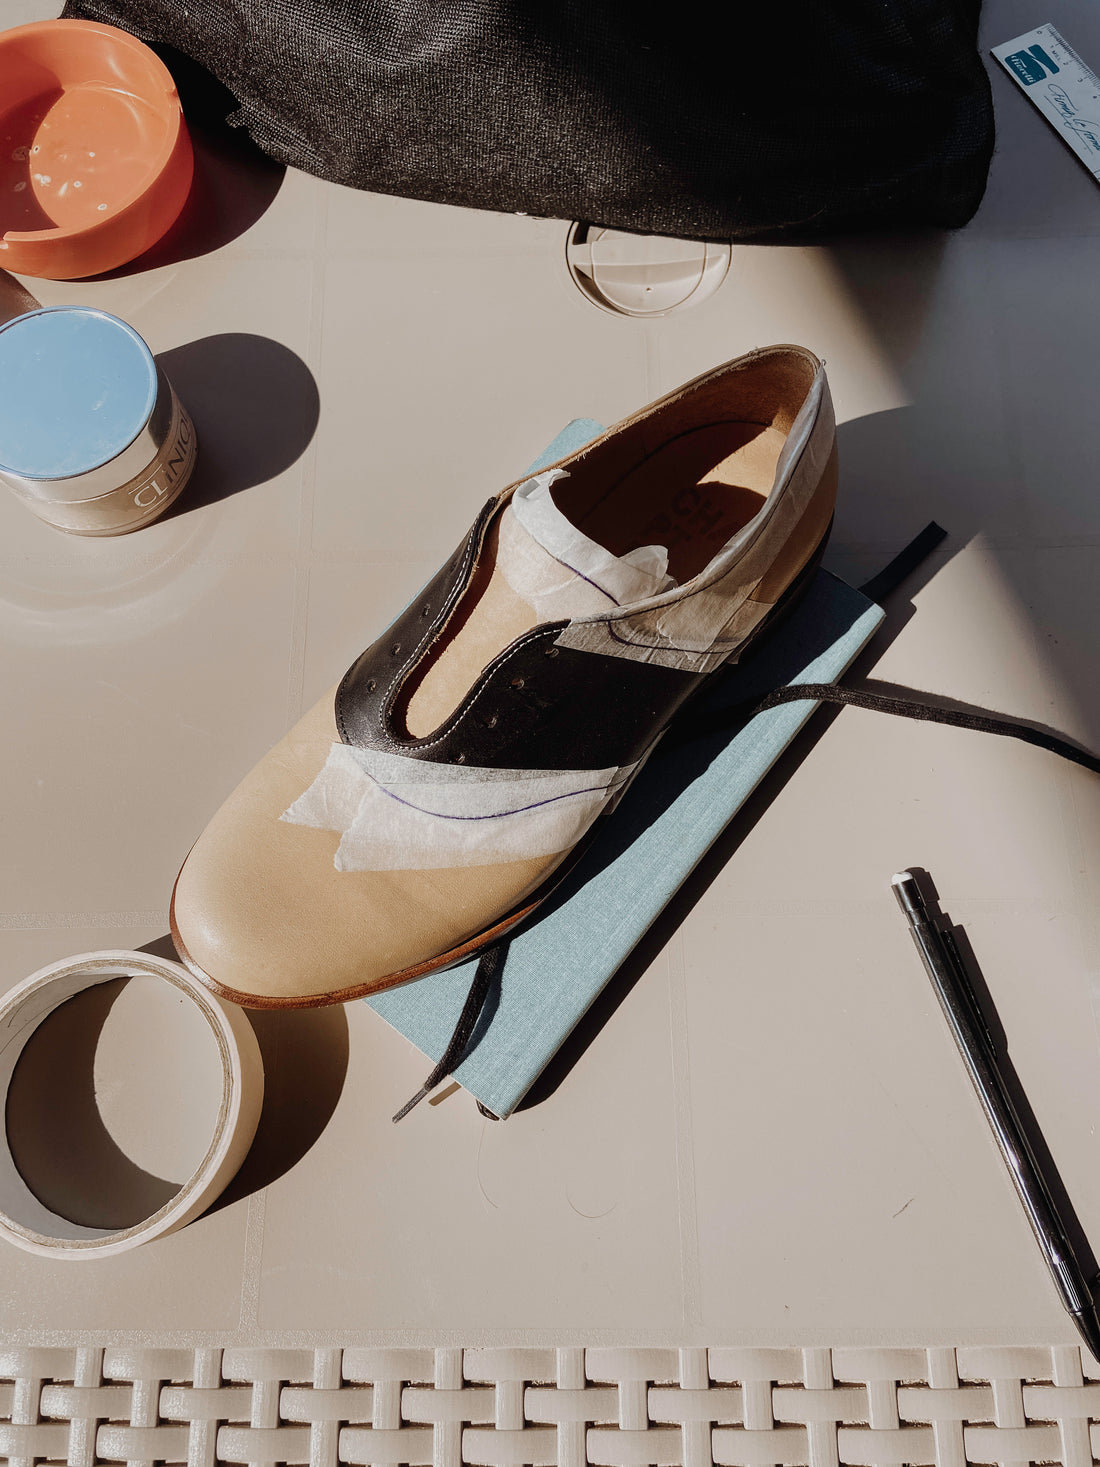 Shoemaking in Italy